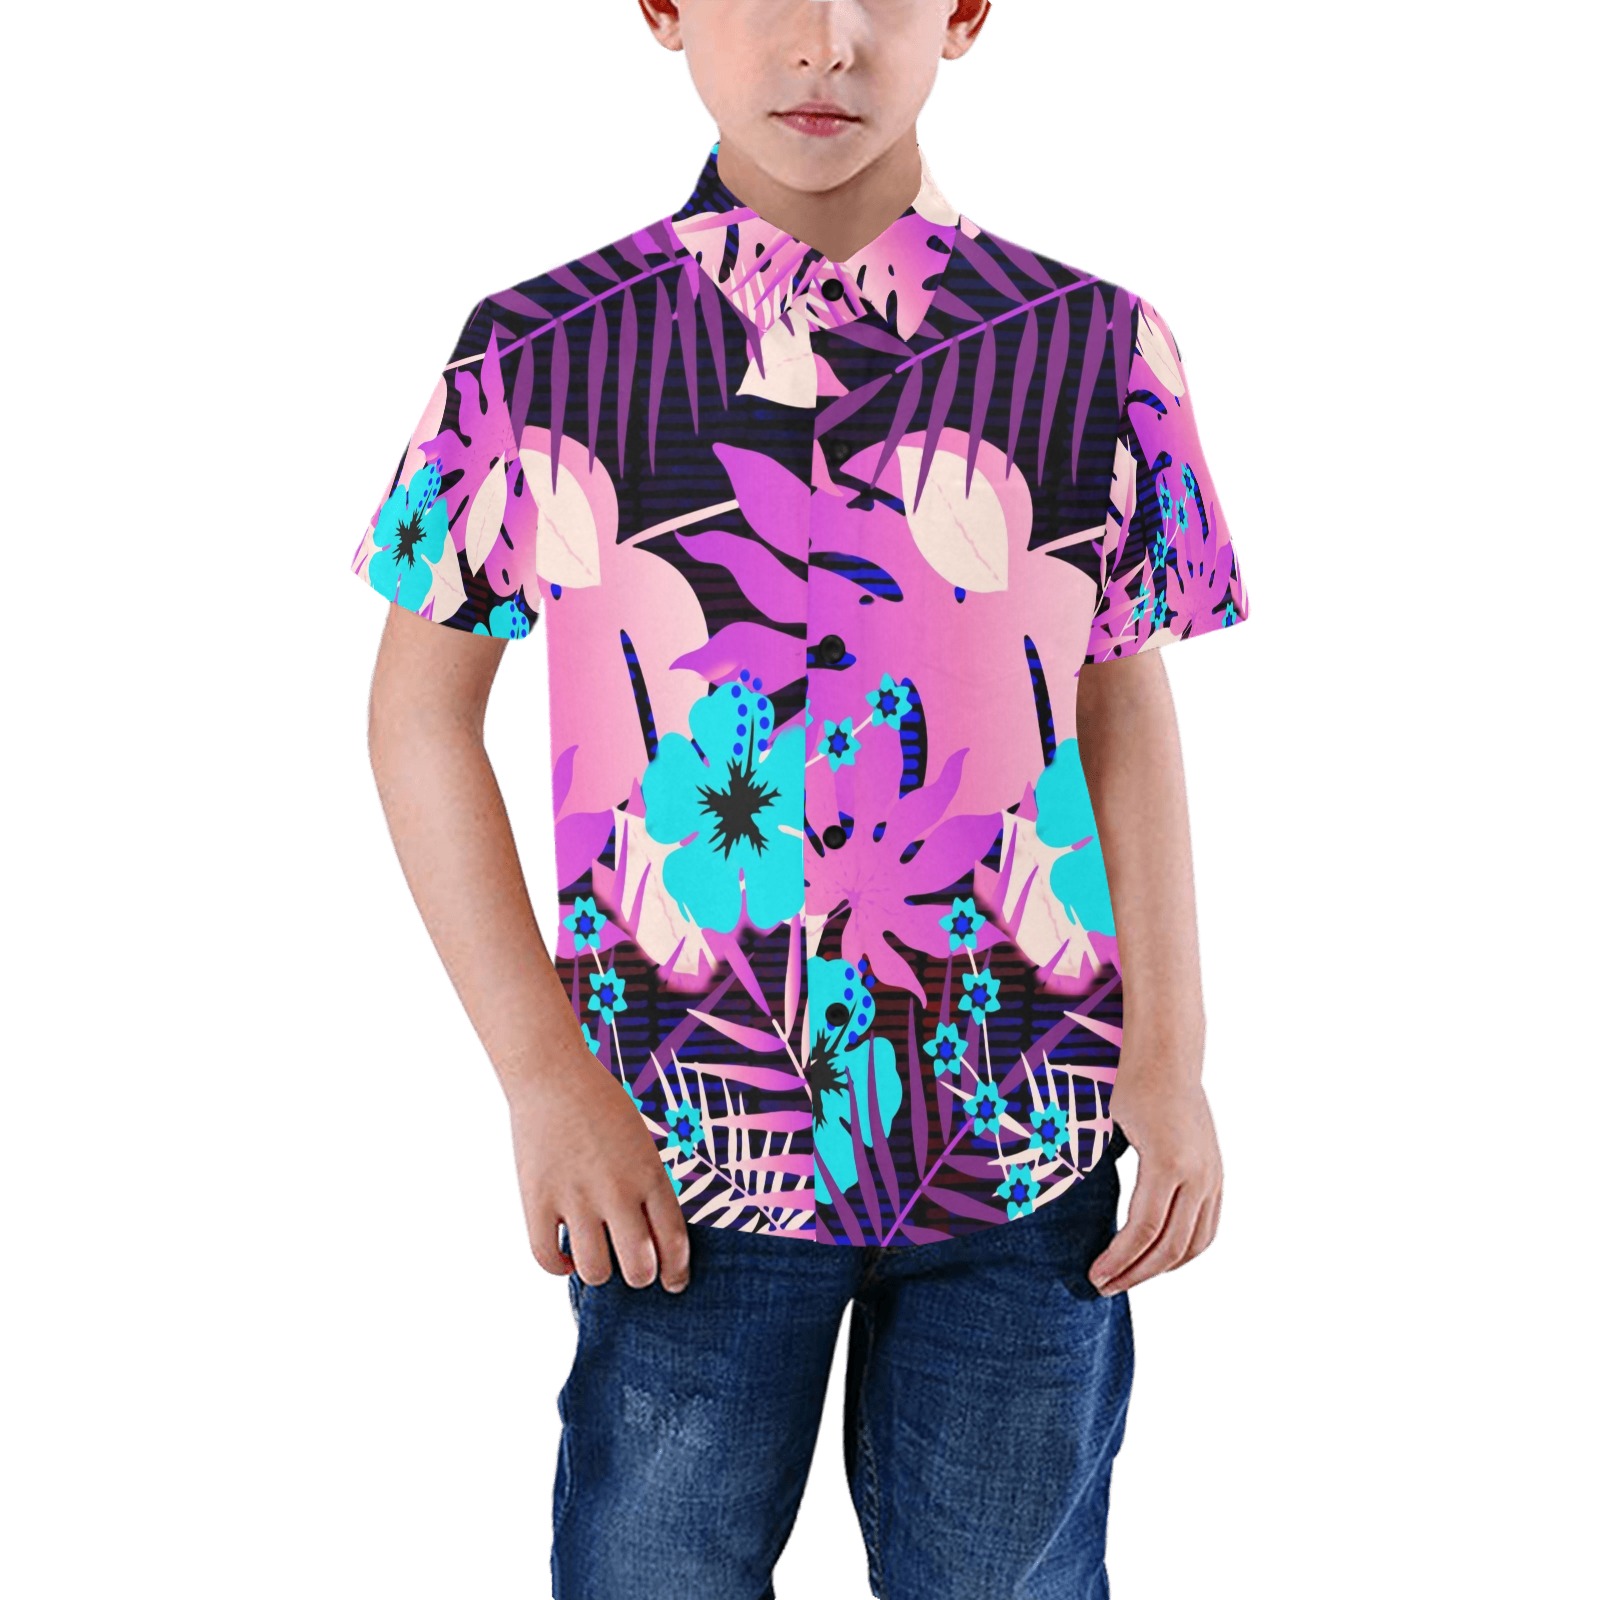 GROOVY FUNK THING FLORAL PURPLE Boys' All Over Print Short Sleeve Shirt (Model T59)